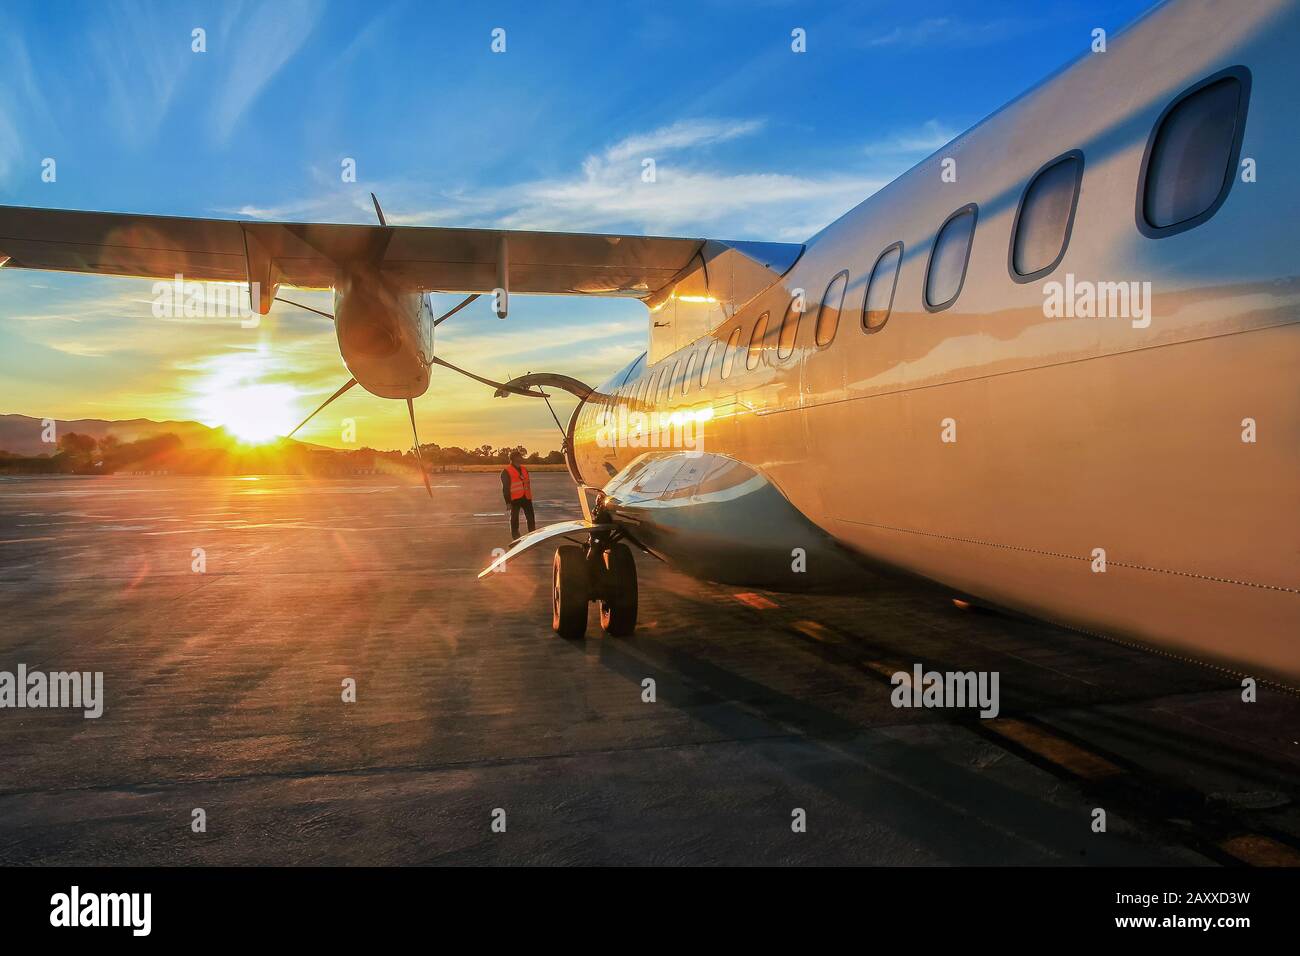 Majestic sunrise in Italian airport.  The yellow rays of the sun miraculously illuminate a plane in Italy. Stock Photo